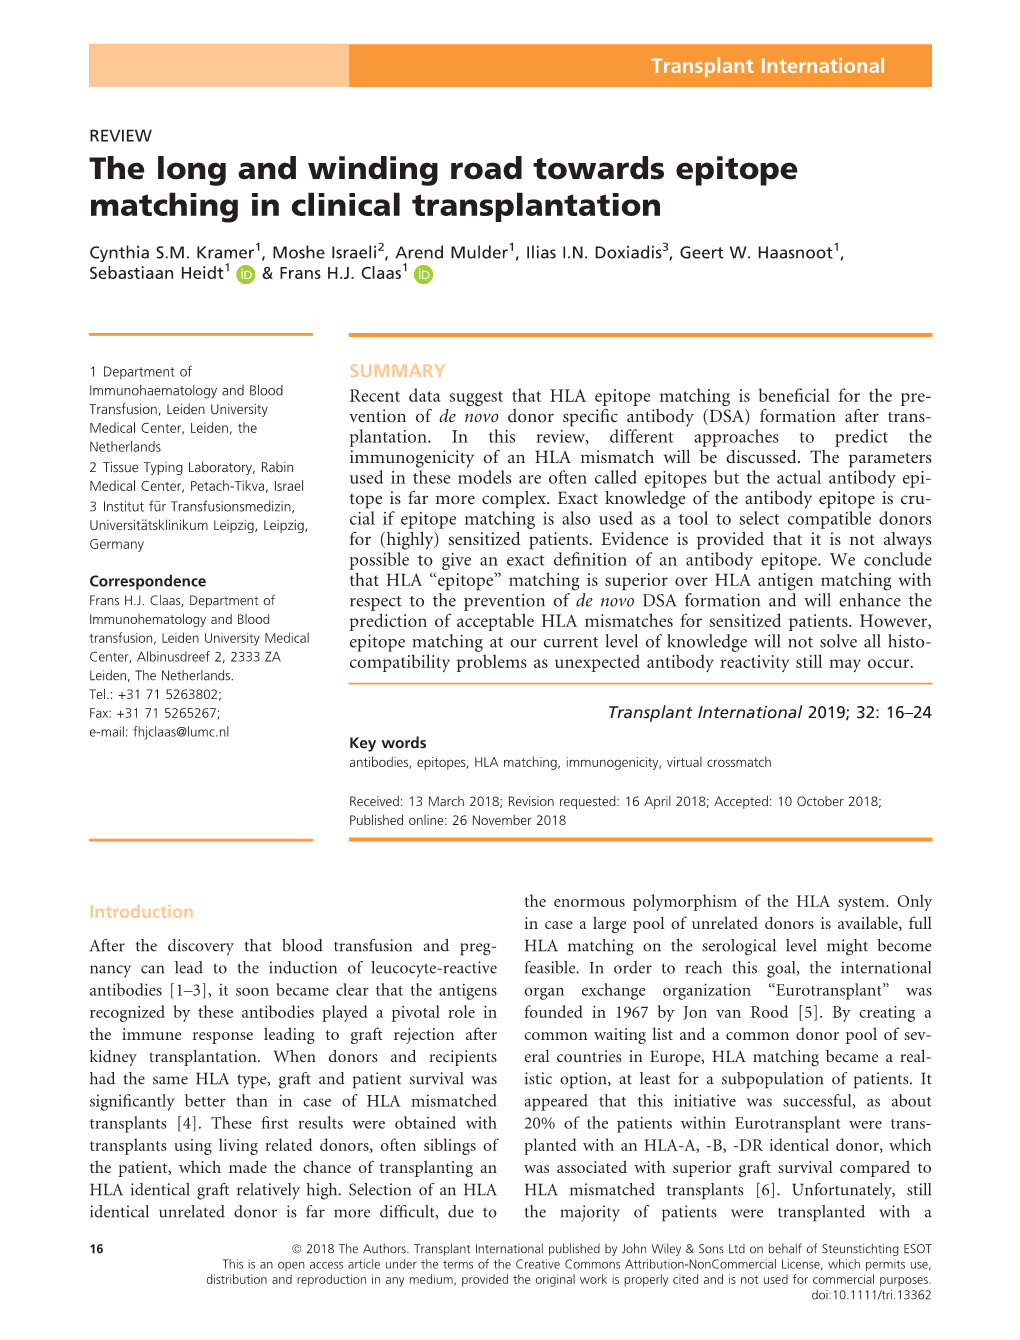 The Long and Winding Road Towards Epitope Matching in Clinical Transplantation